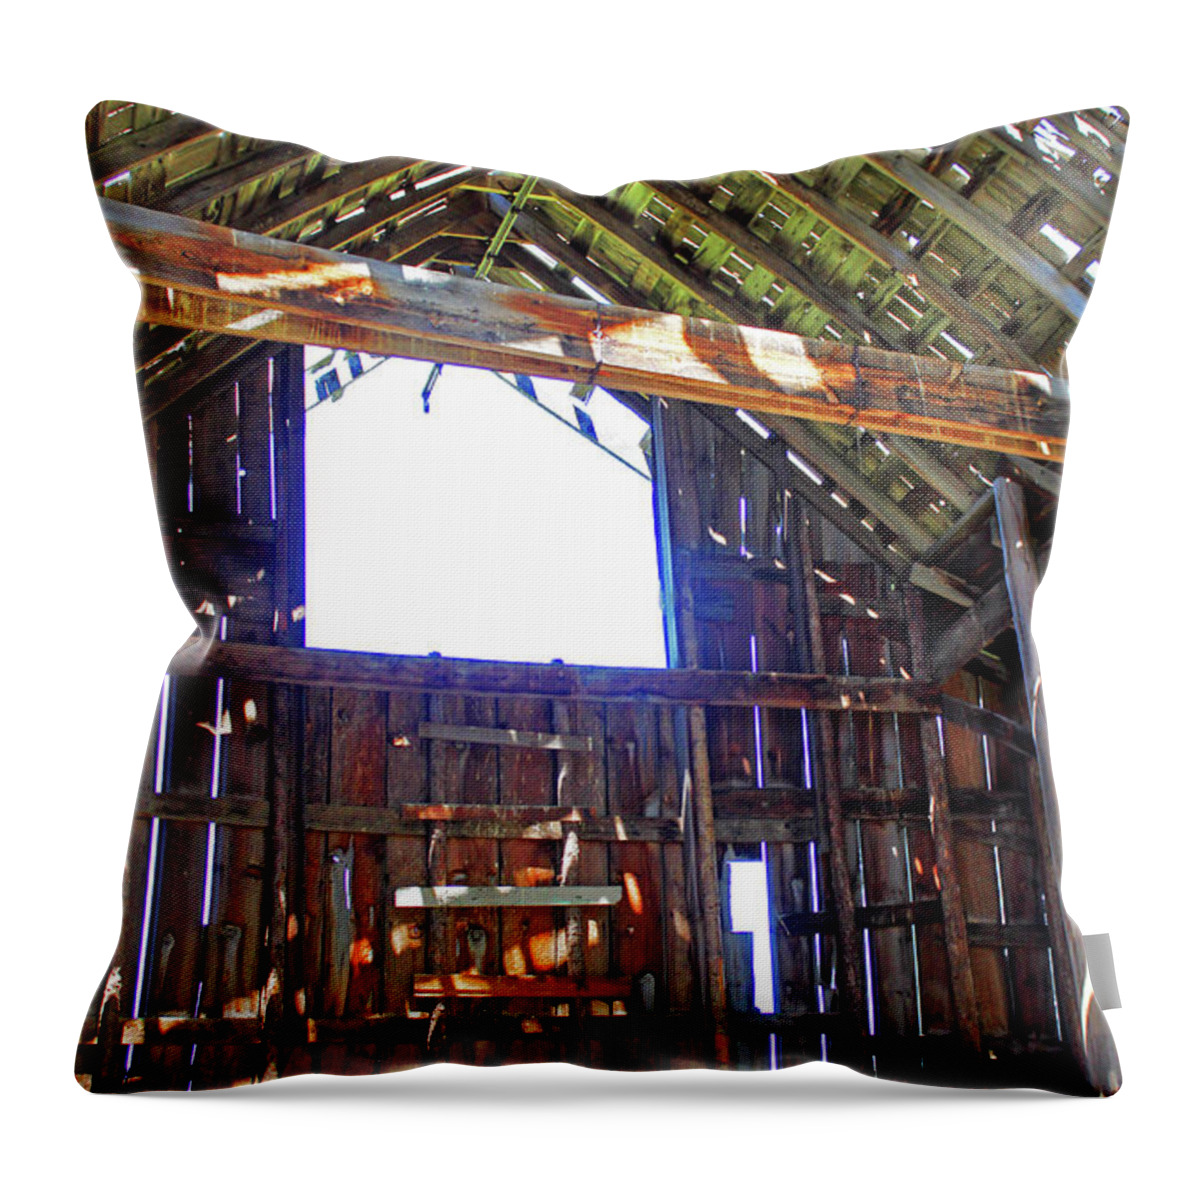 Barn Throw Pillow featuring the photograph Sunlit Loft by Ira Marcus